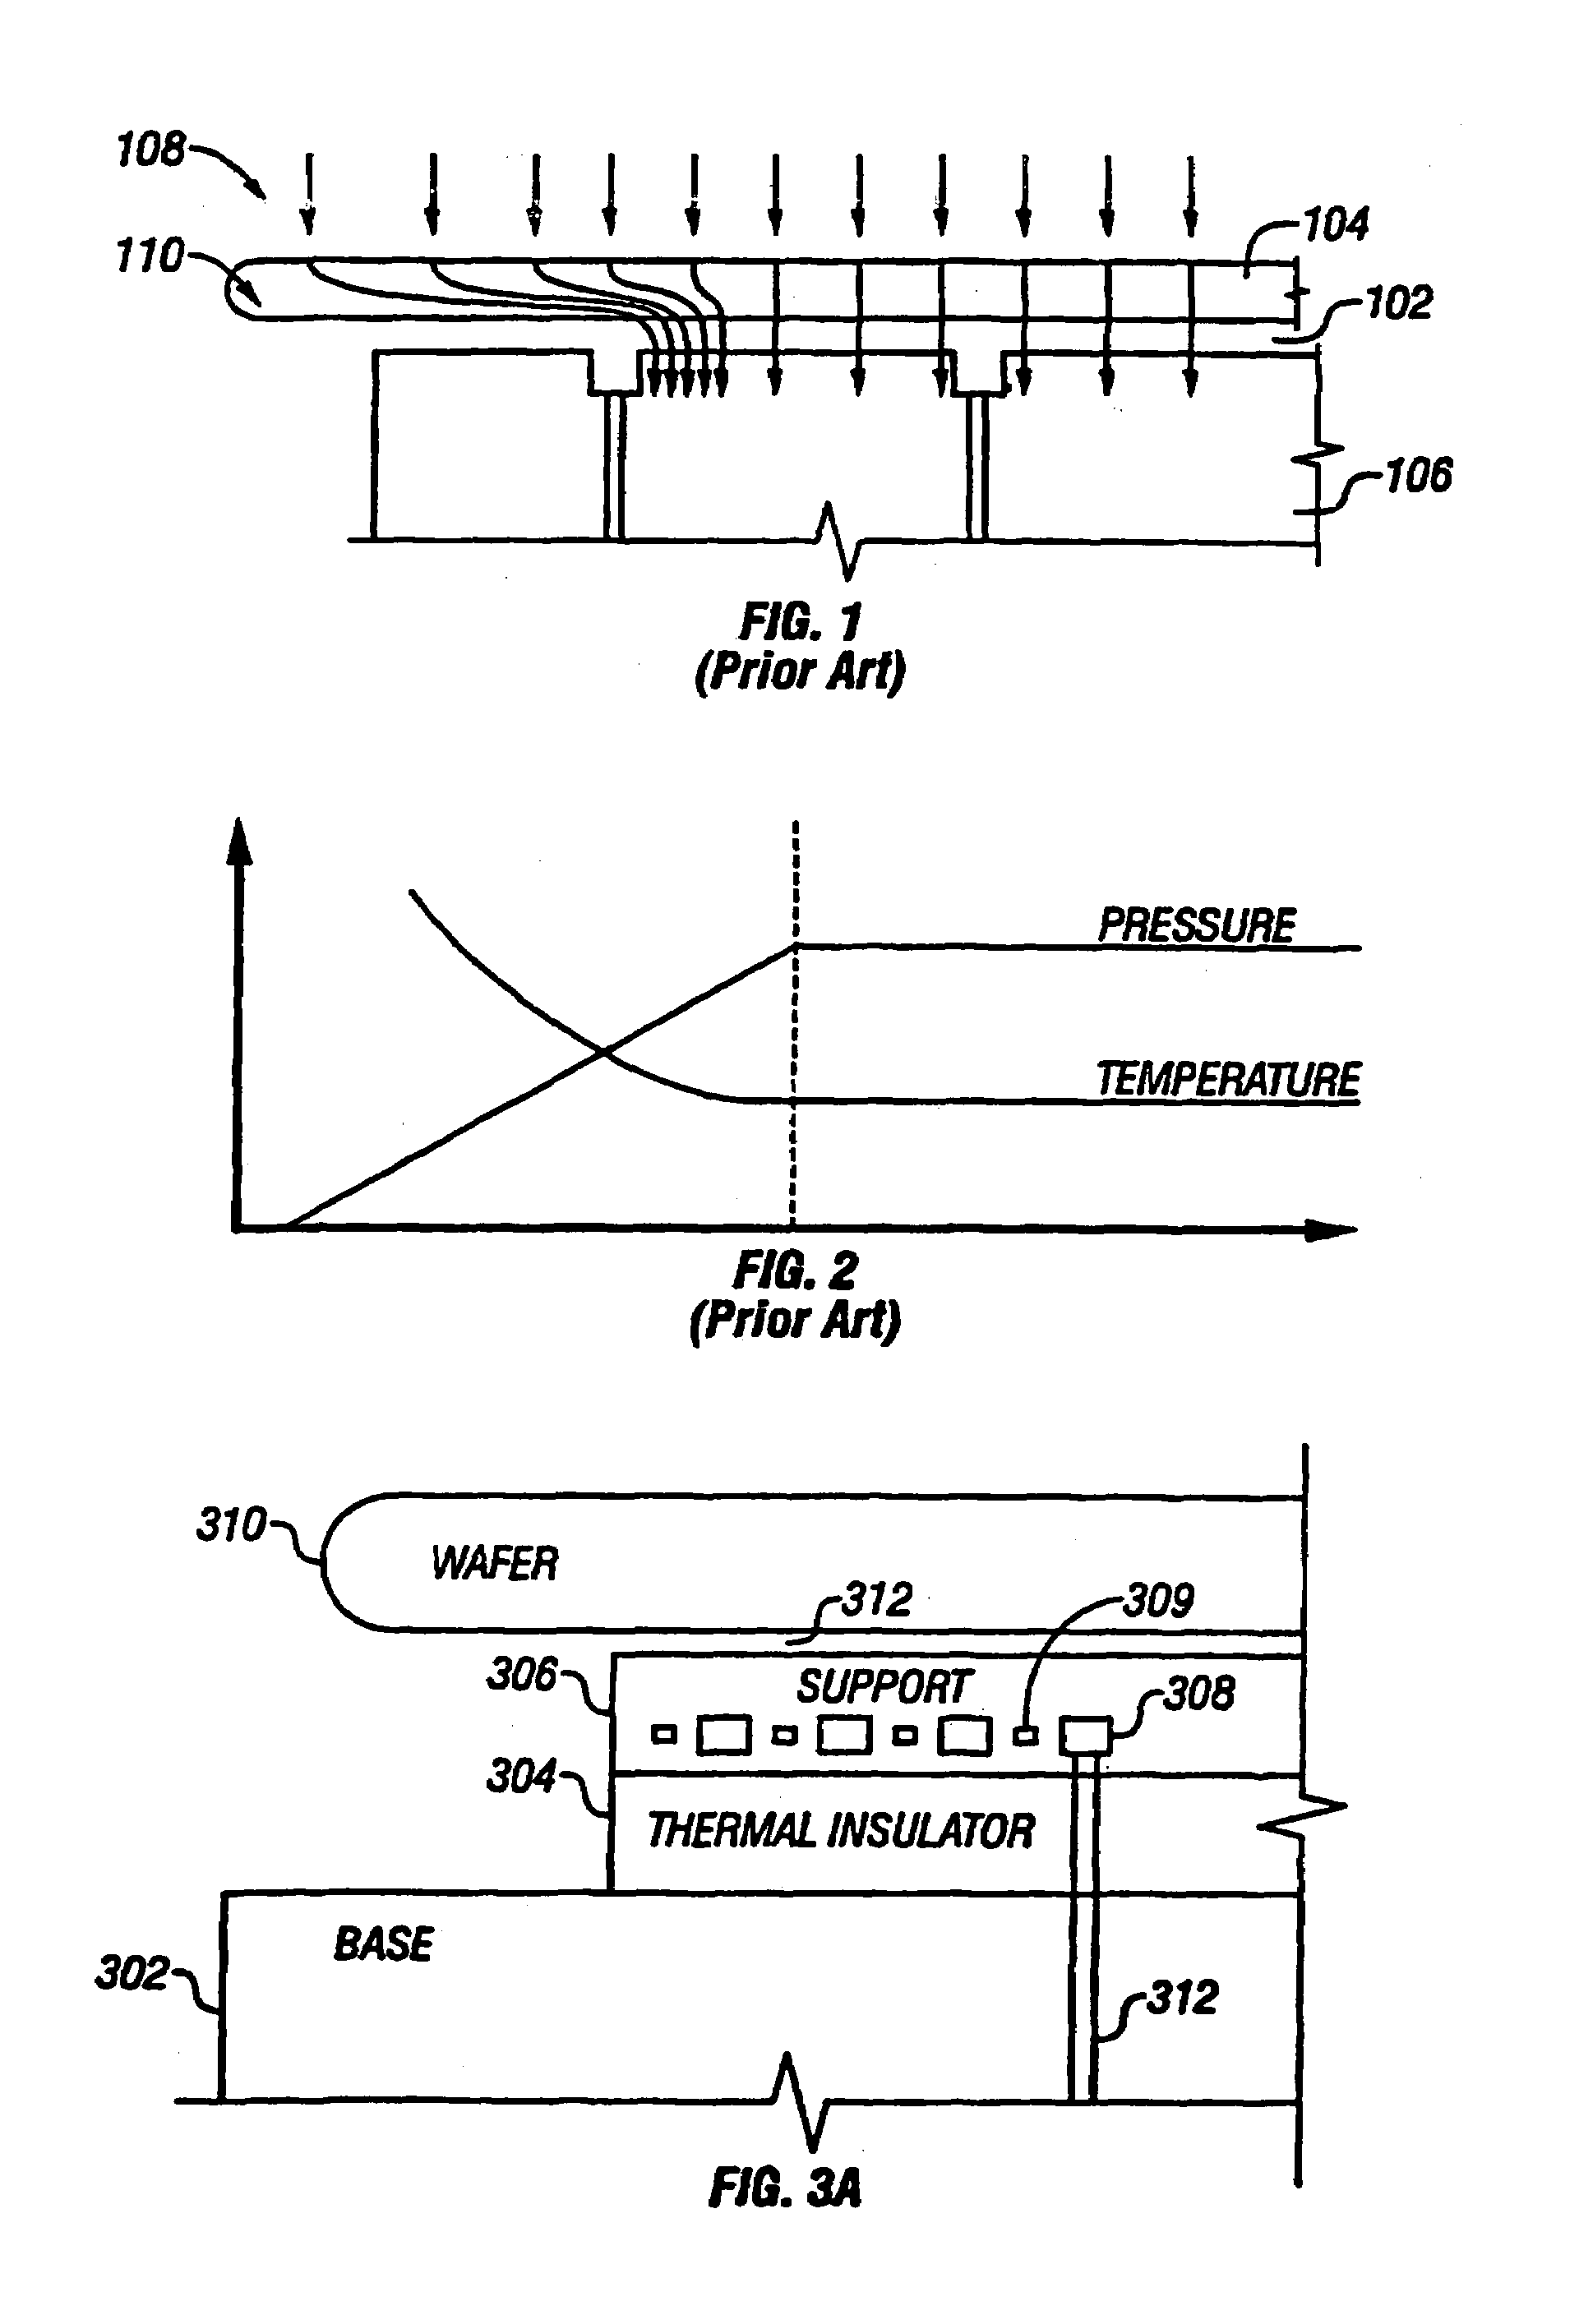 Method and apparatus for controlling the spatial temperature distribution across the surface of a workpiece support